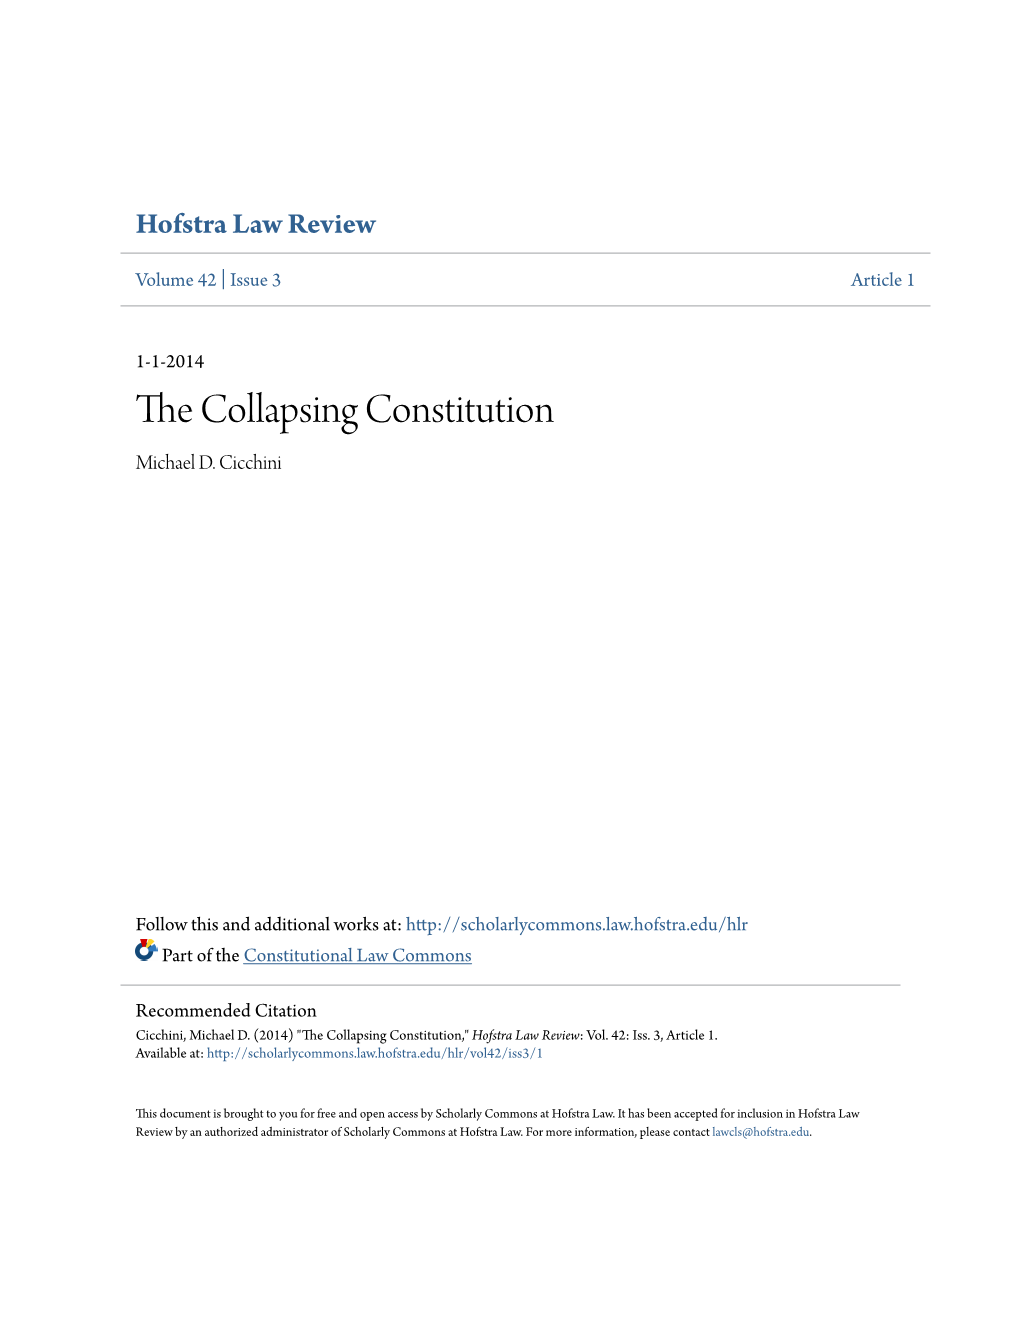 The Collapsing Constitution